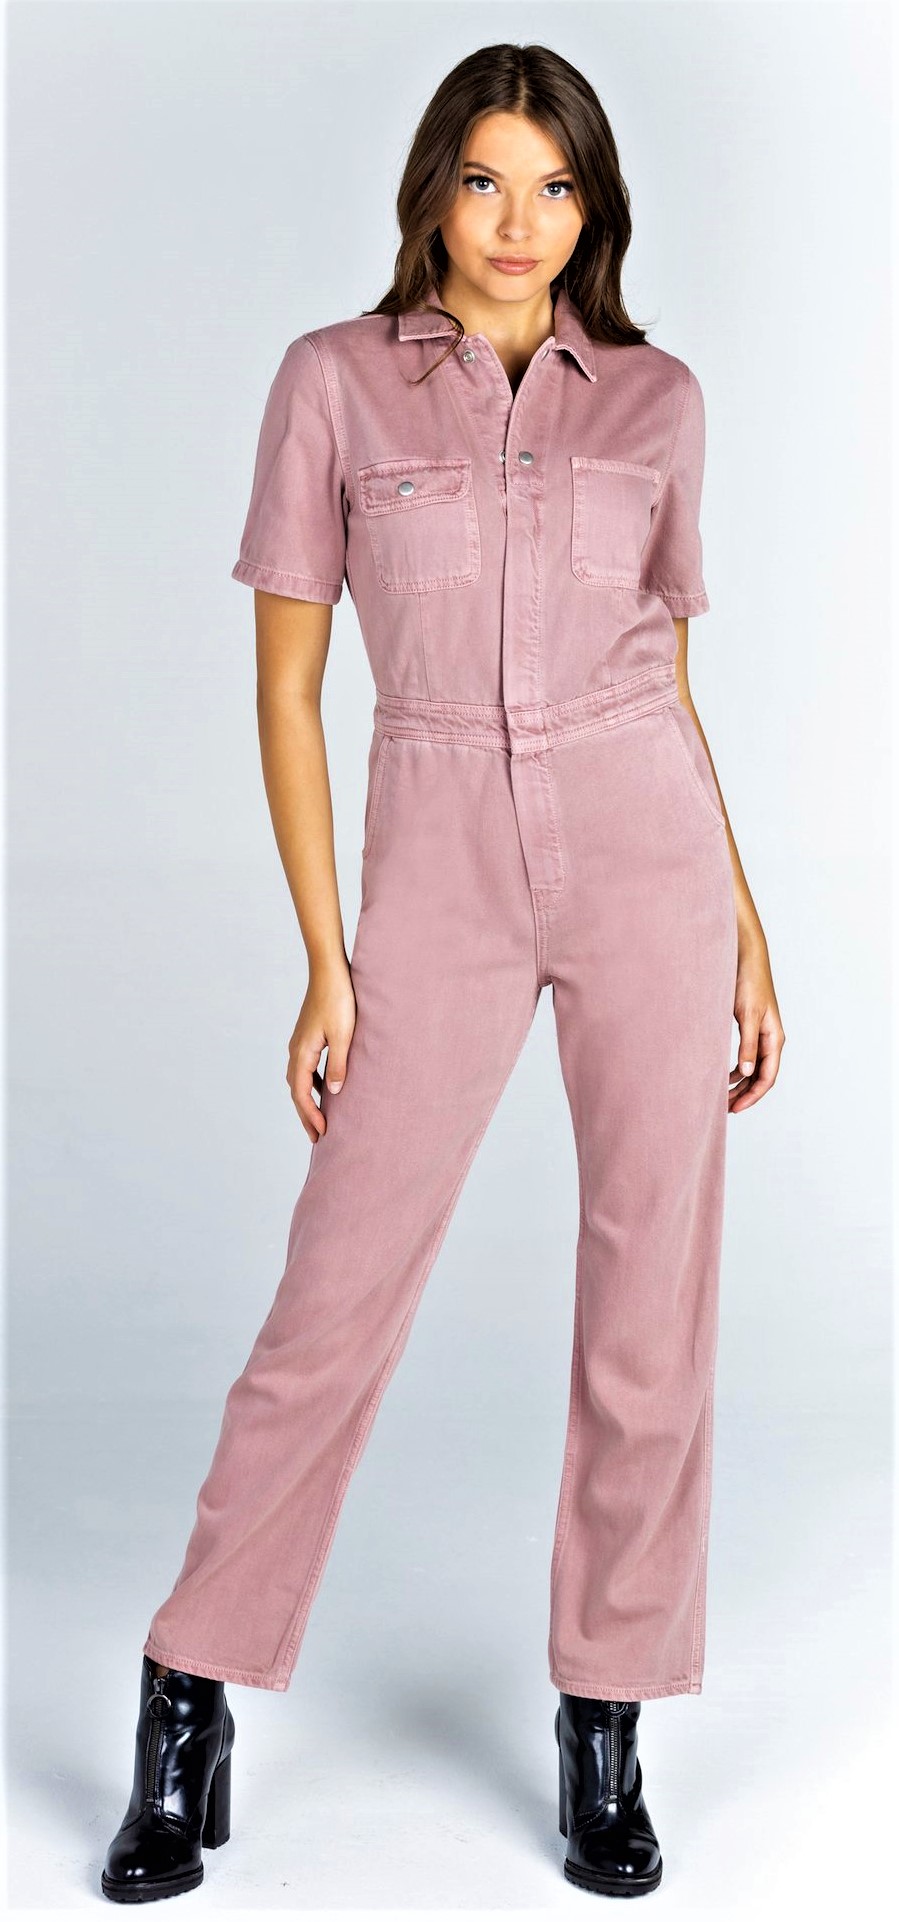 LA Mart 10-21 articles of society pink jumpsuit cropped.jpg